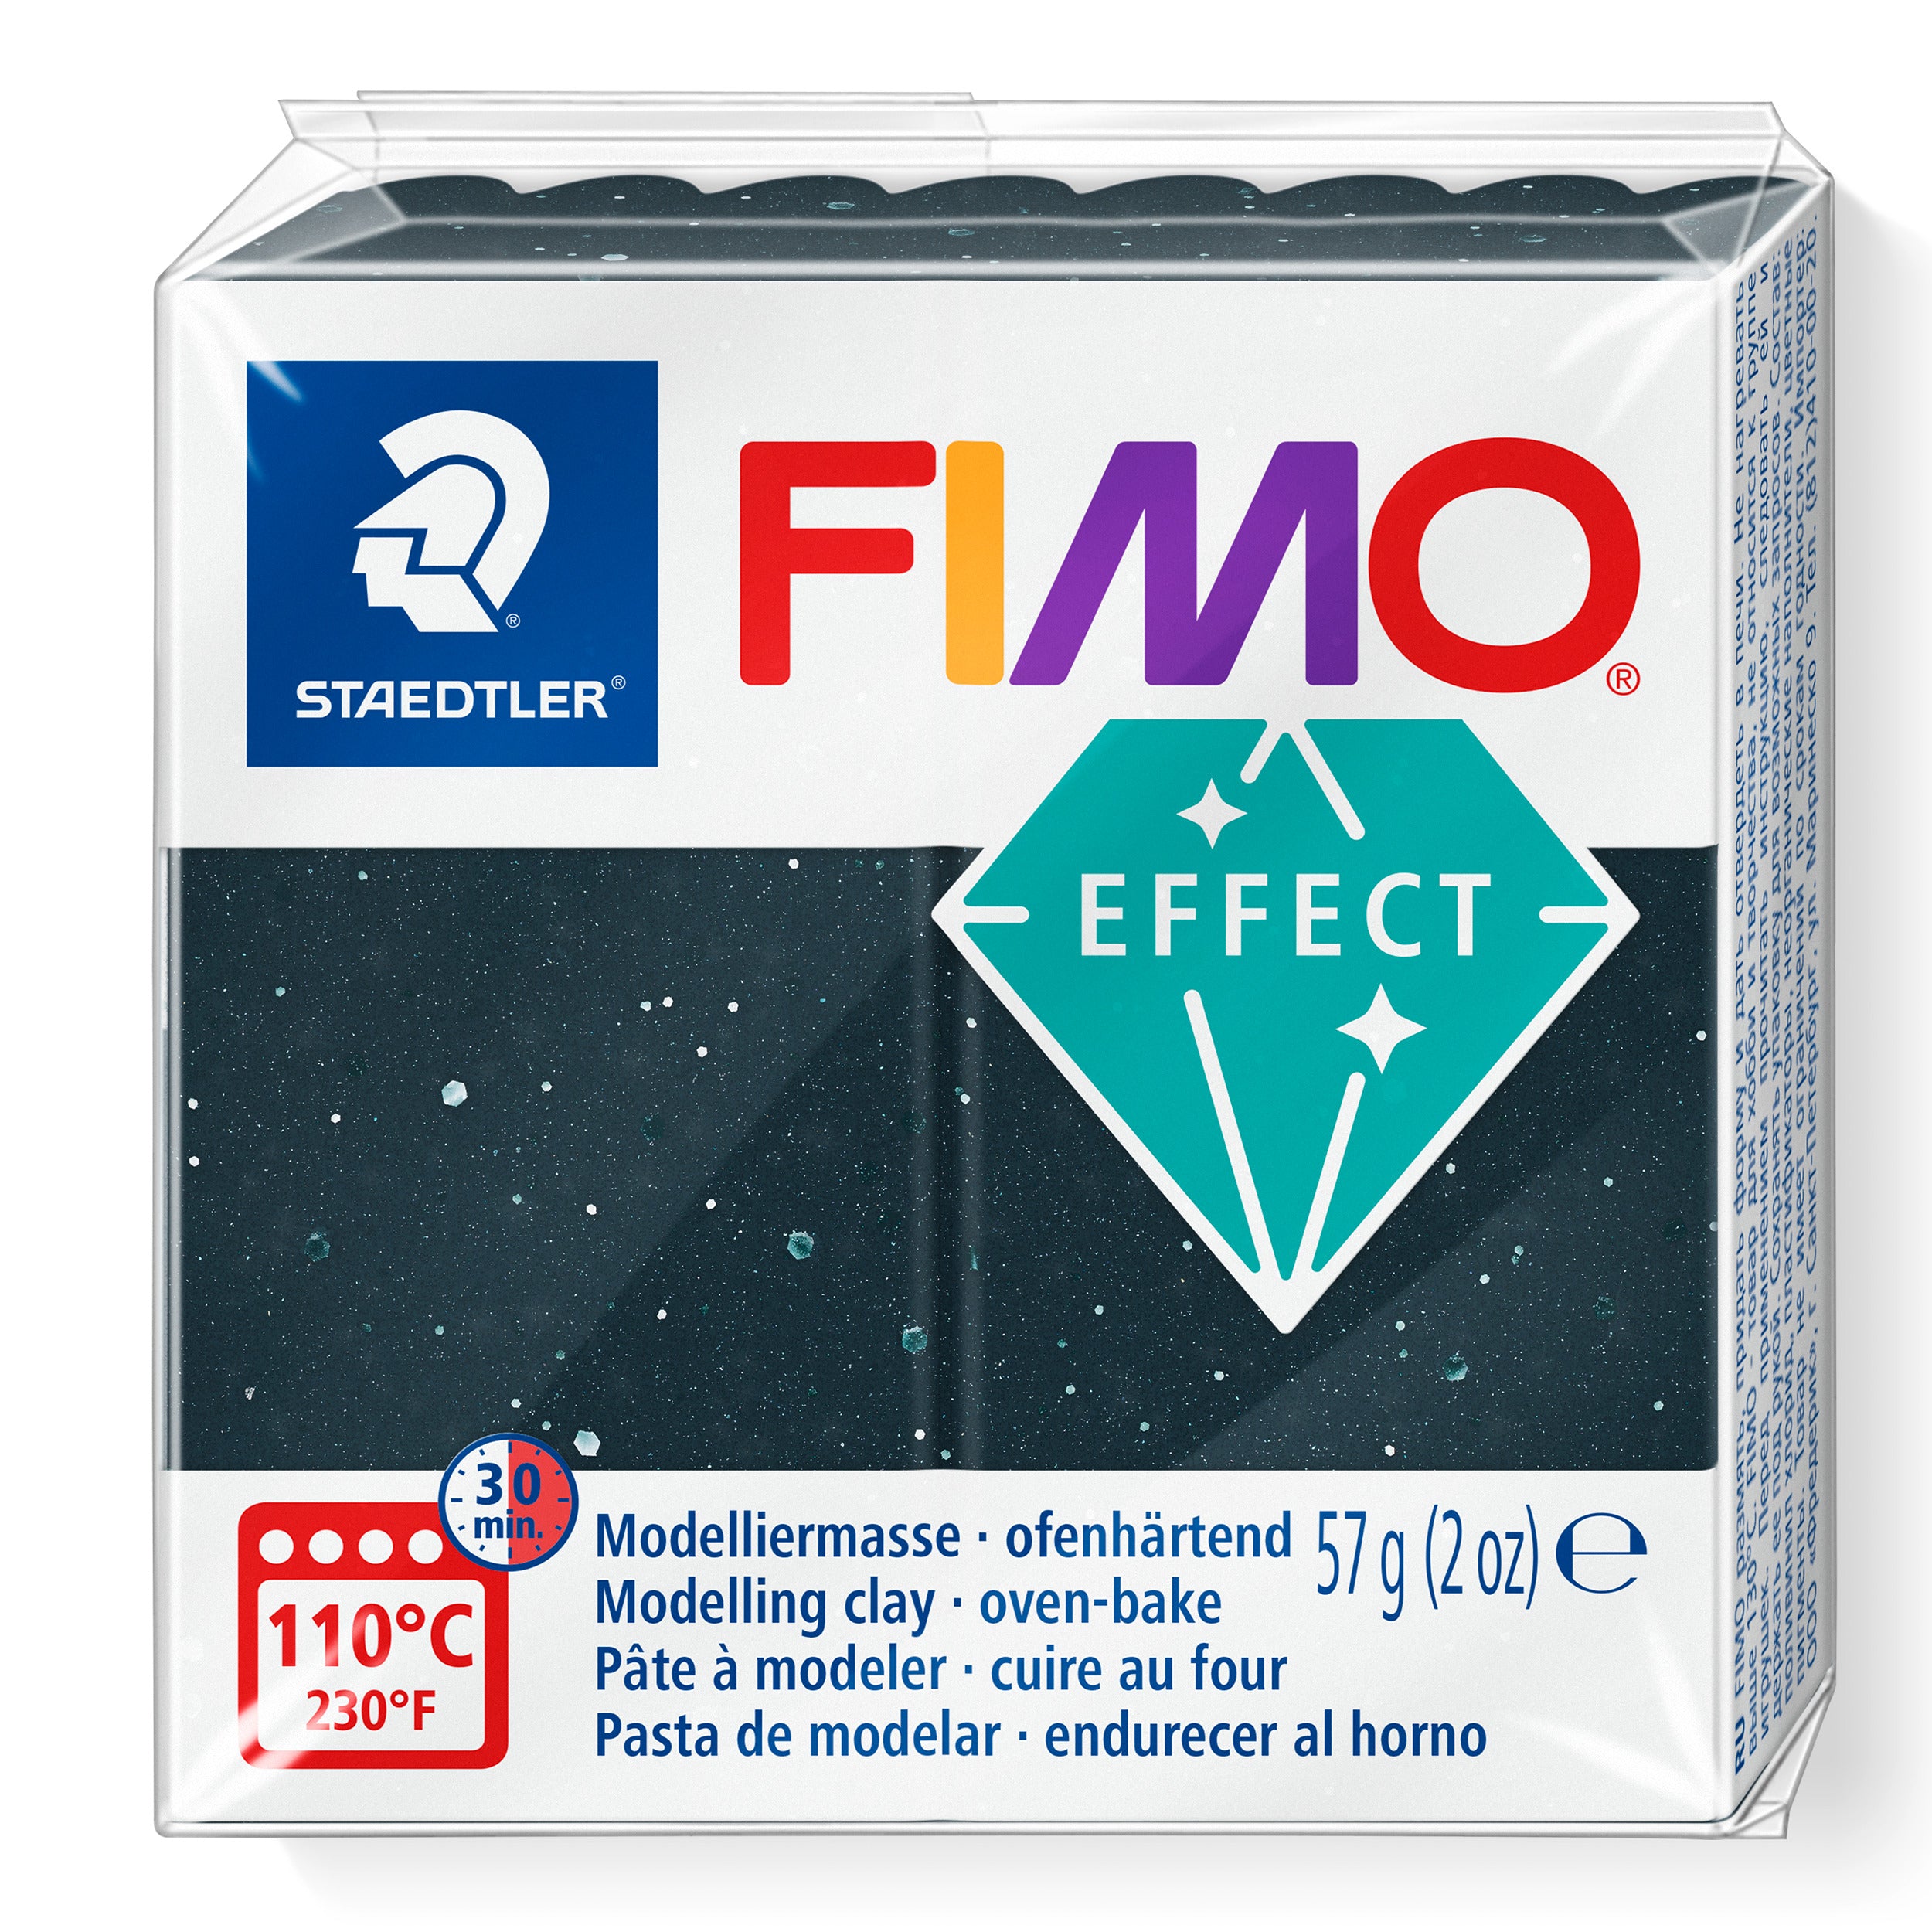 NEW Stone Black Granite FIMO Effects Polymer Clay 57g 8010-903